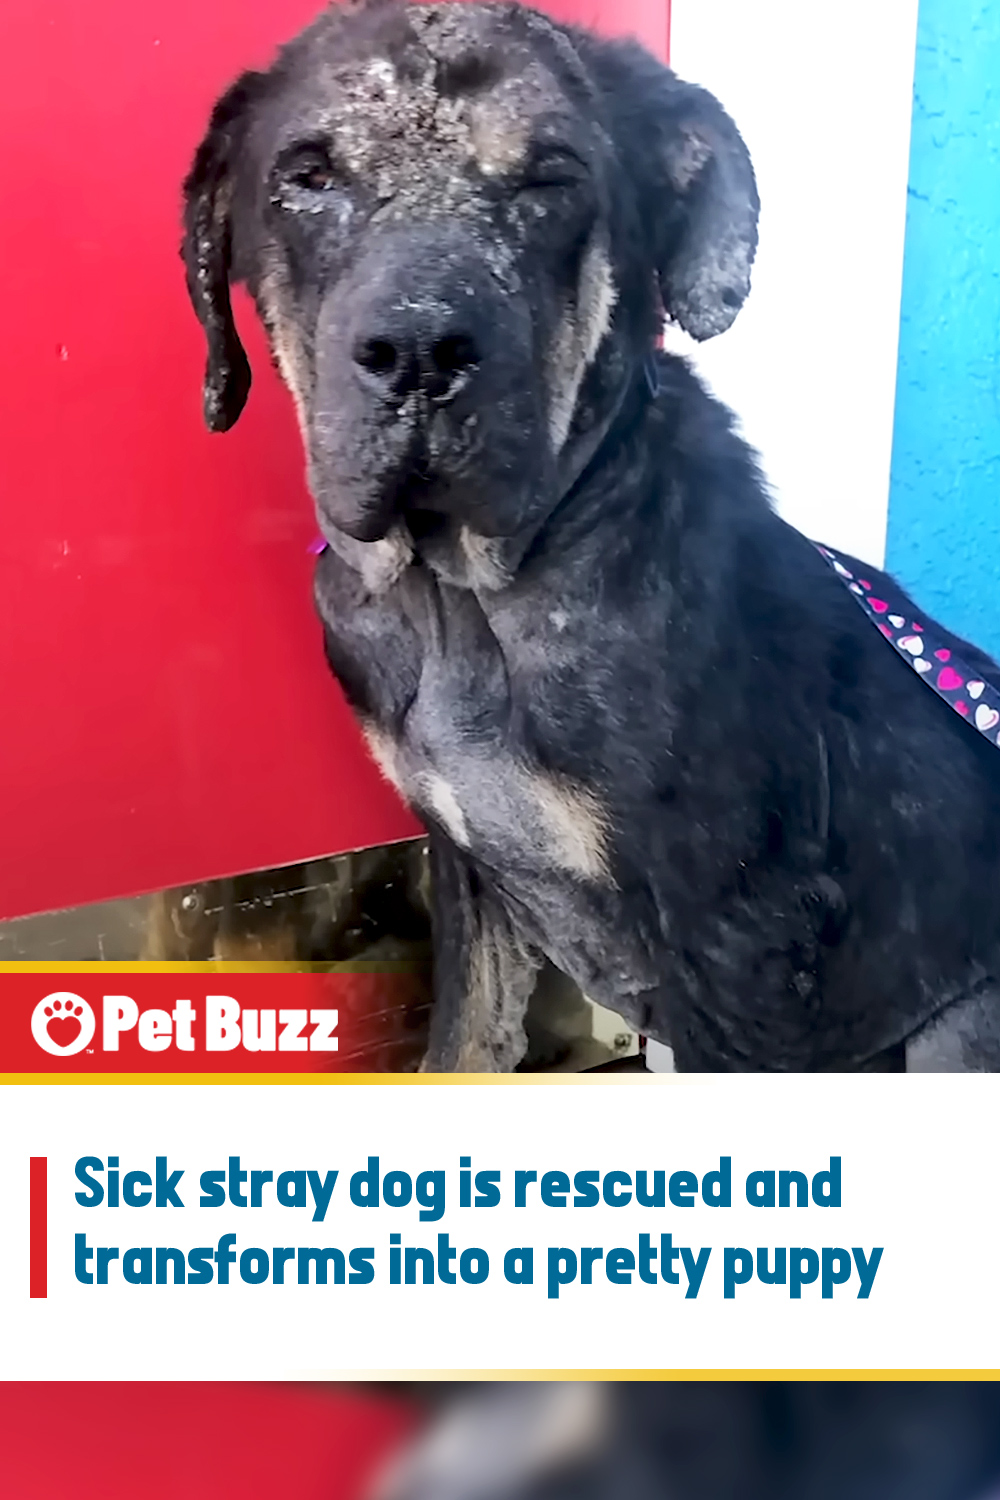 Sick stray dog is rescued and transforms into a pretty puppy